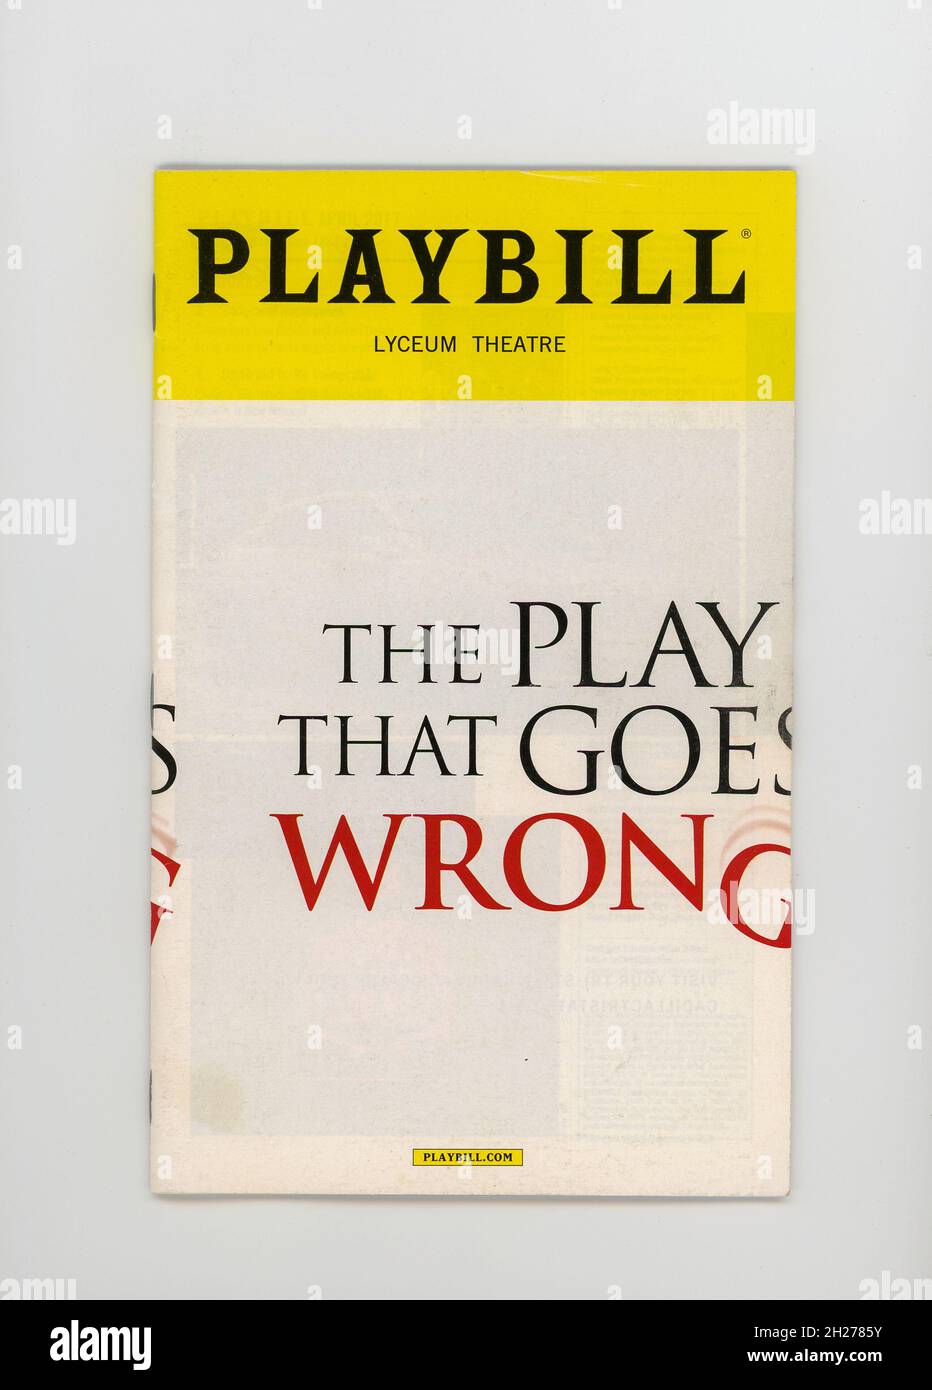 'The Play that Goes Wrong' Broadway Theatere Playbill, NYC Stock Photo